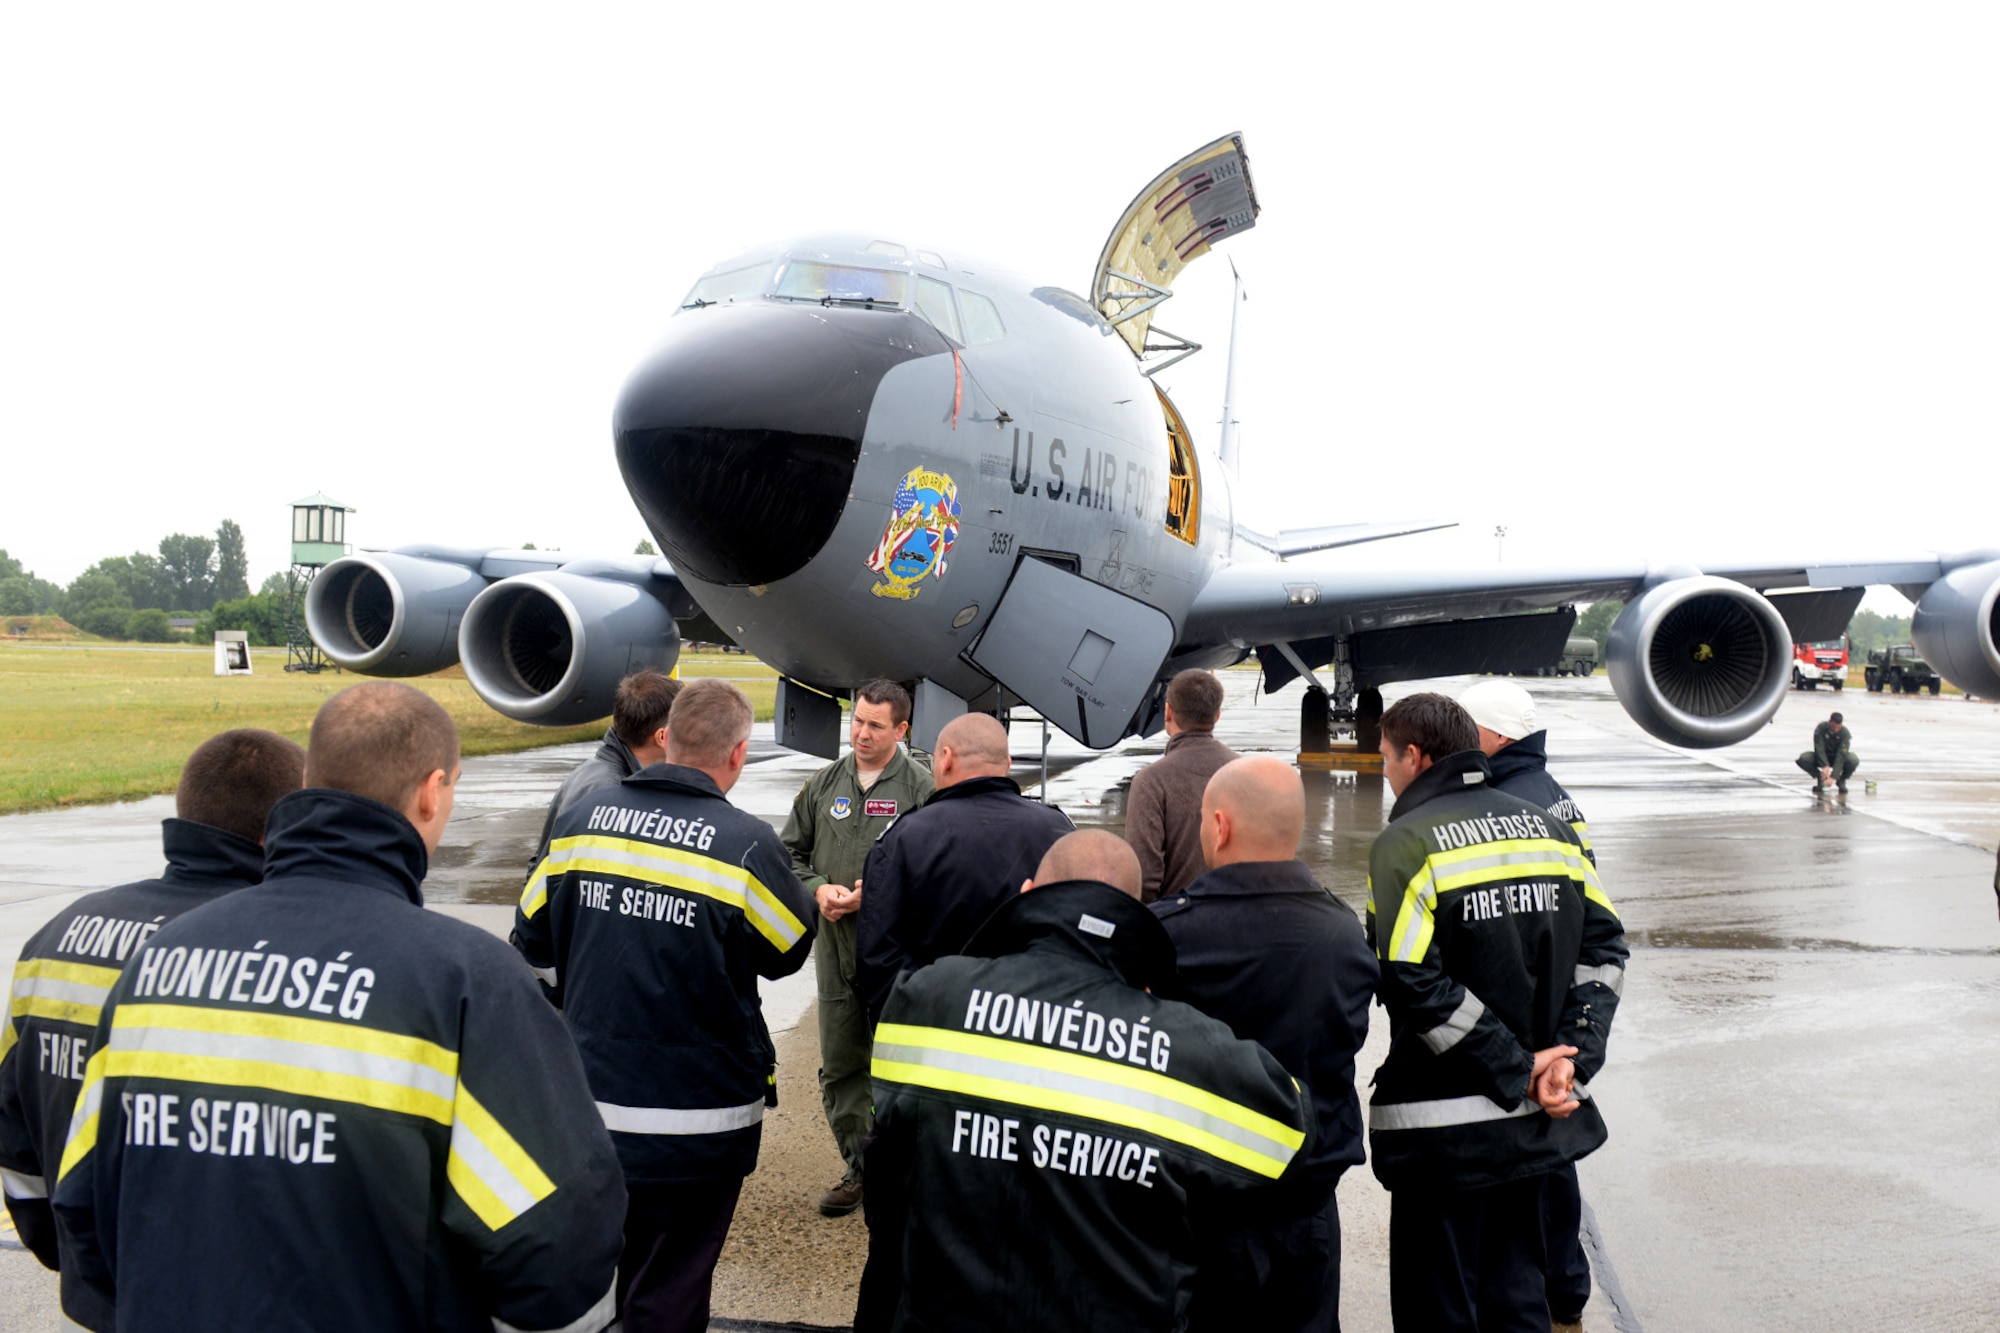 U.S. Air Force Maj. Benjamin Kline, center, 100th Air Refueling Wing KC-135 Stratotanker pilot and command post chief from Taylor, Mich., briefs Hungarian air force firefighters on the aircraft’s safety procedures June 24, 2015, during air refueling familiarization training on Kecskemét air base, Hungary. Hungarian, U.S. and Swedish air force personnel met for a two-week familiarization period enabling the Hungarian JAS-39 Gripen pilots to successfully perform air refueling for the first time. (U.S. Air Force photo by Senior Airman Kate Thornton/Released)